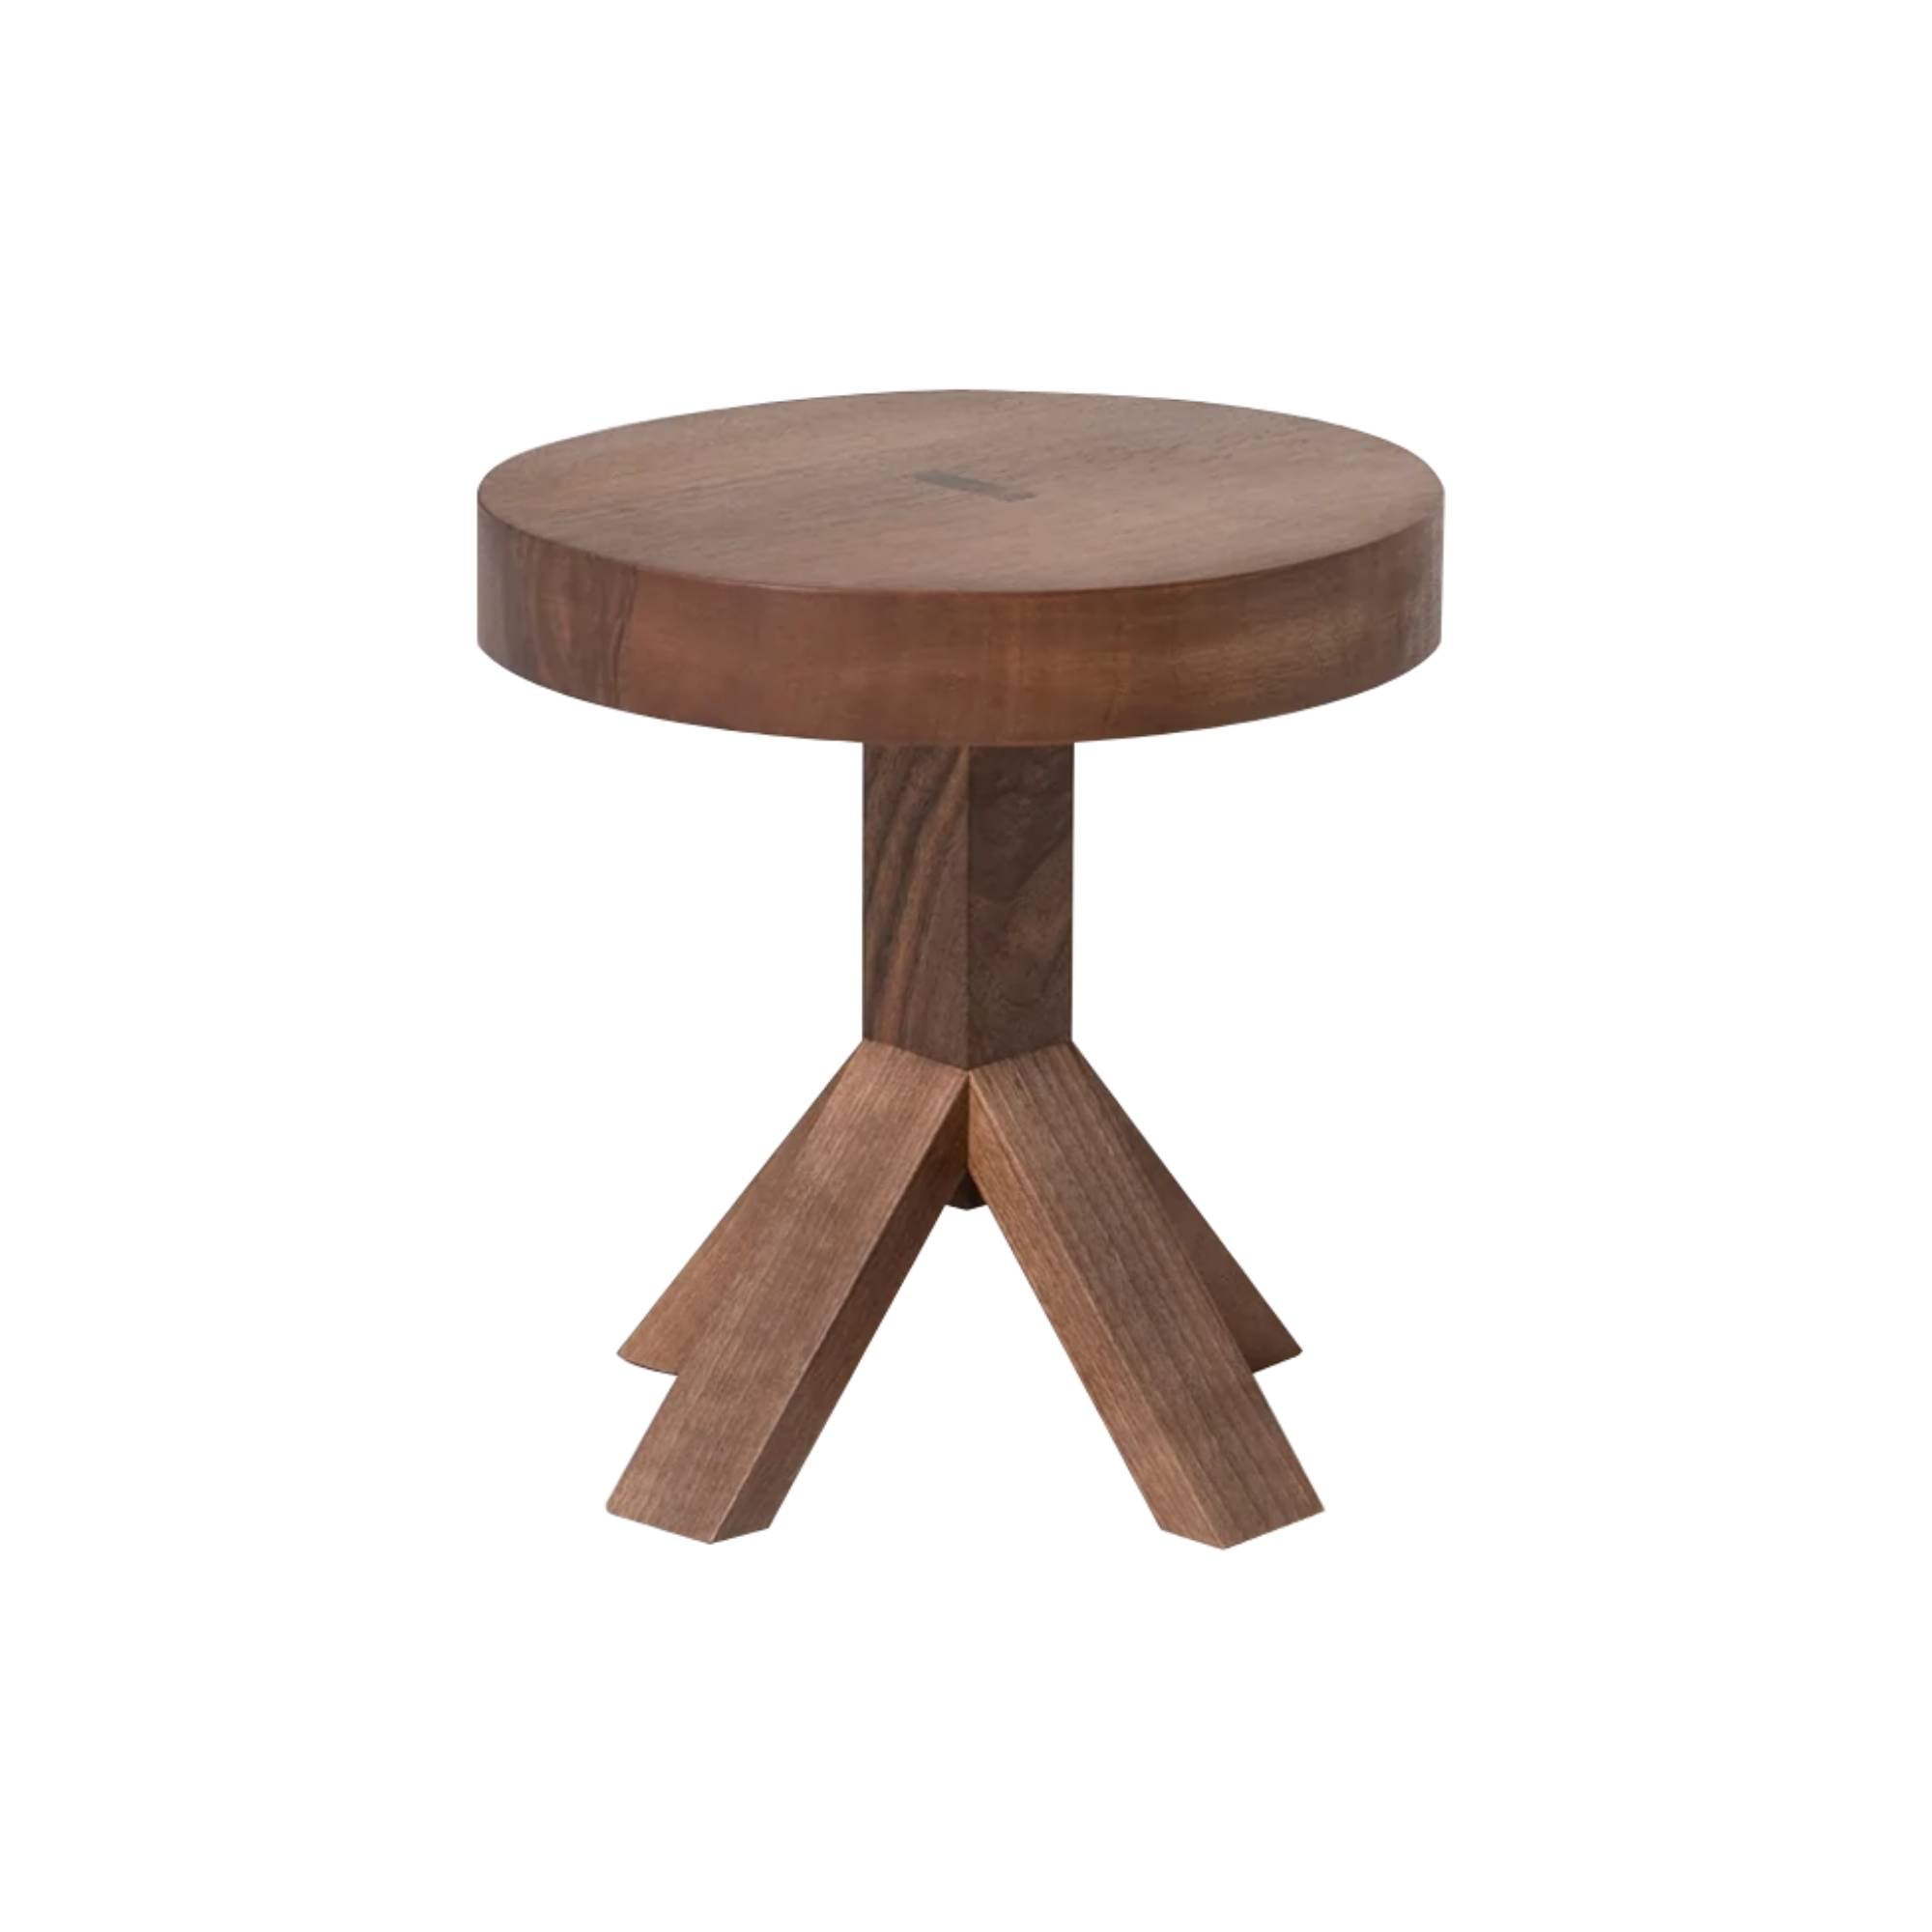 Left + Right Side Table: 4 Legs